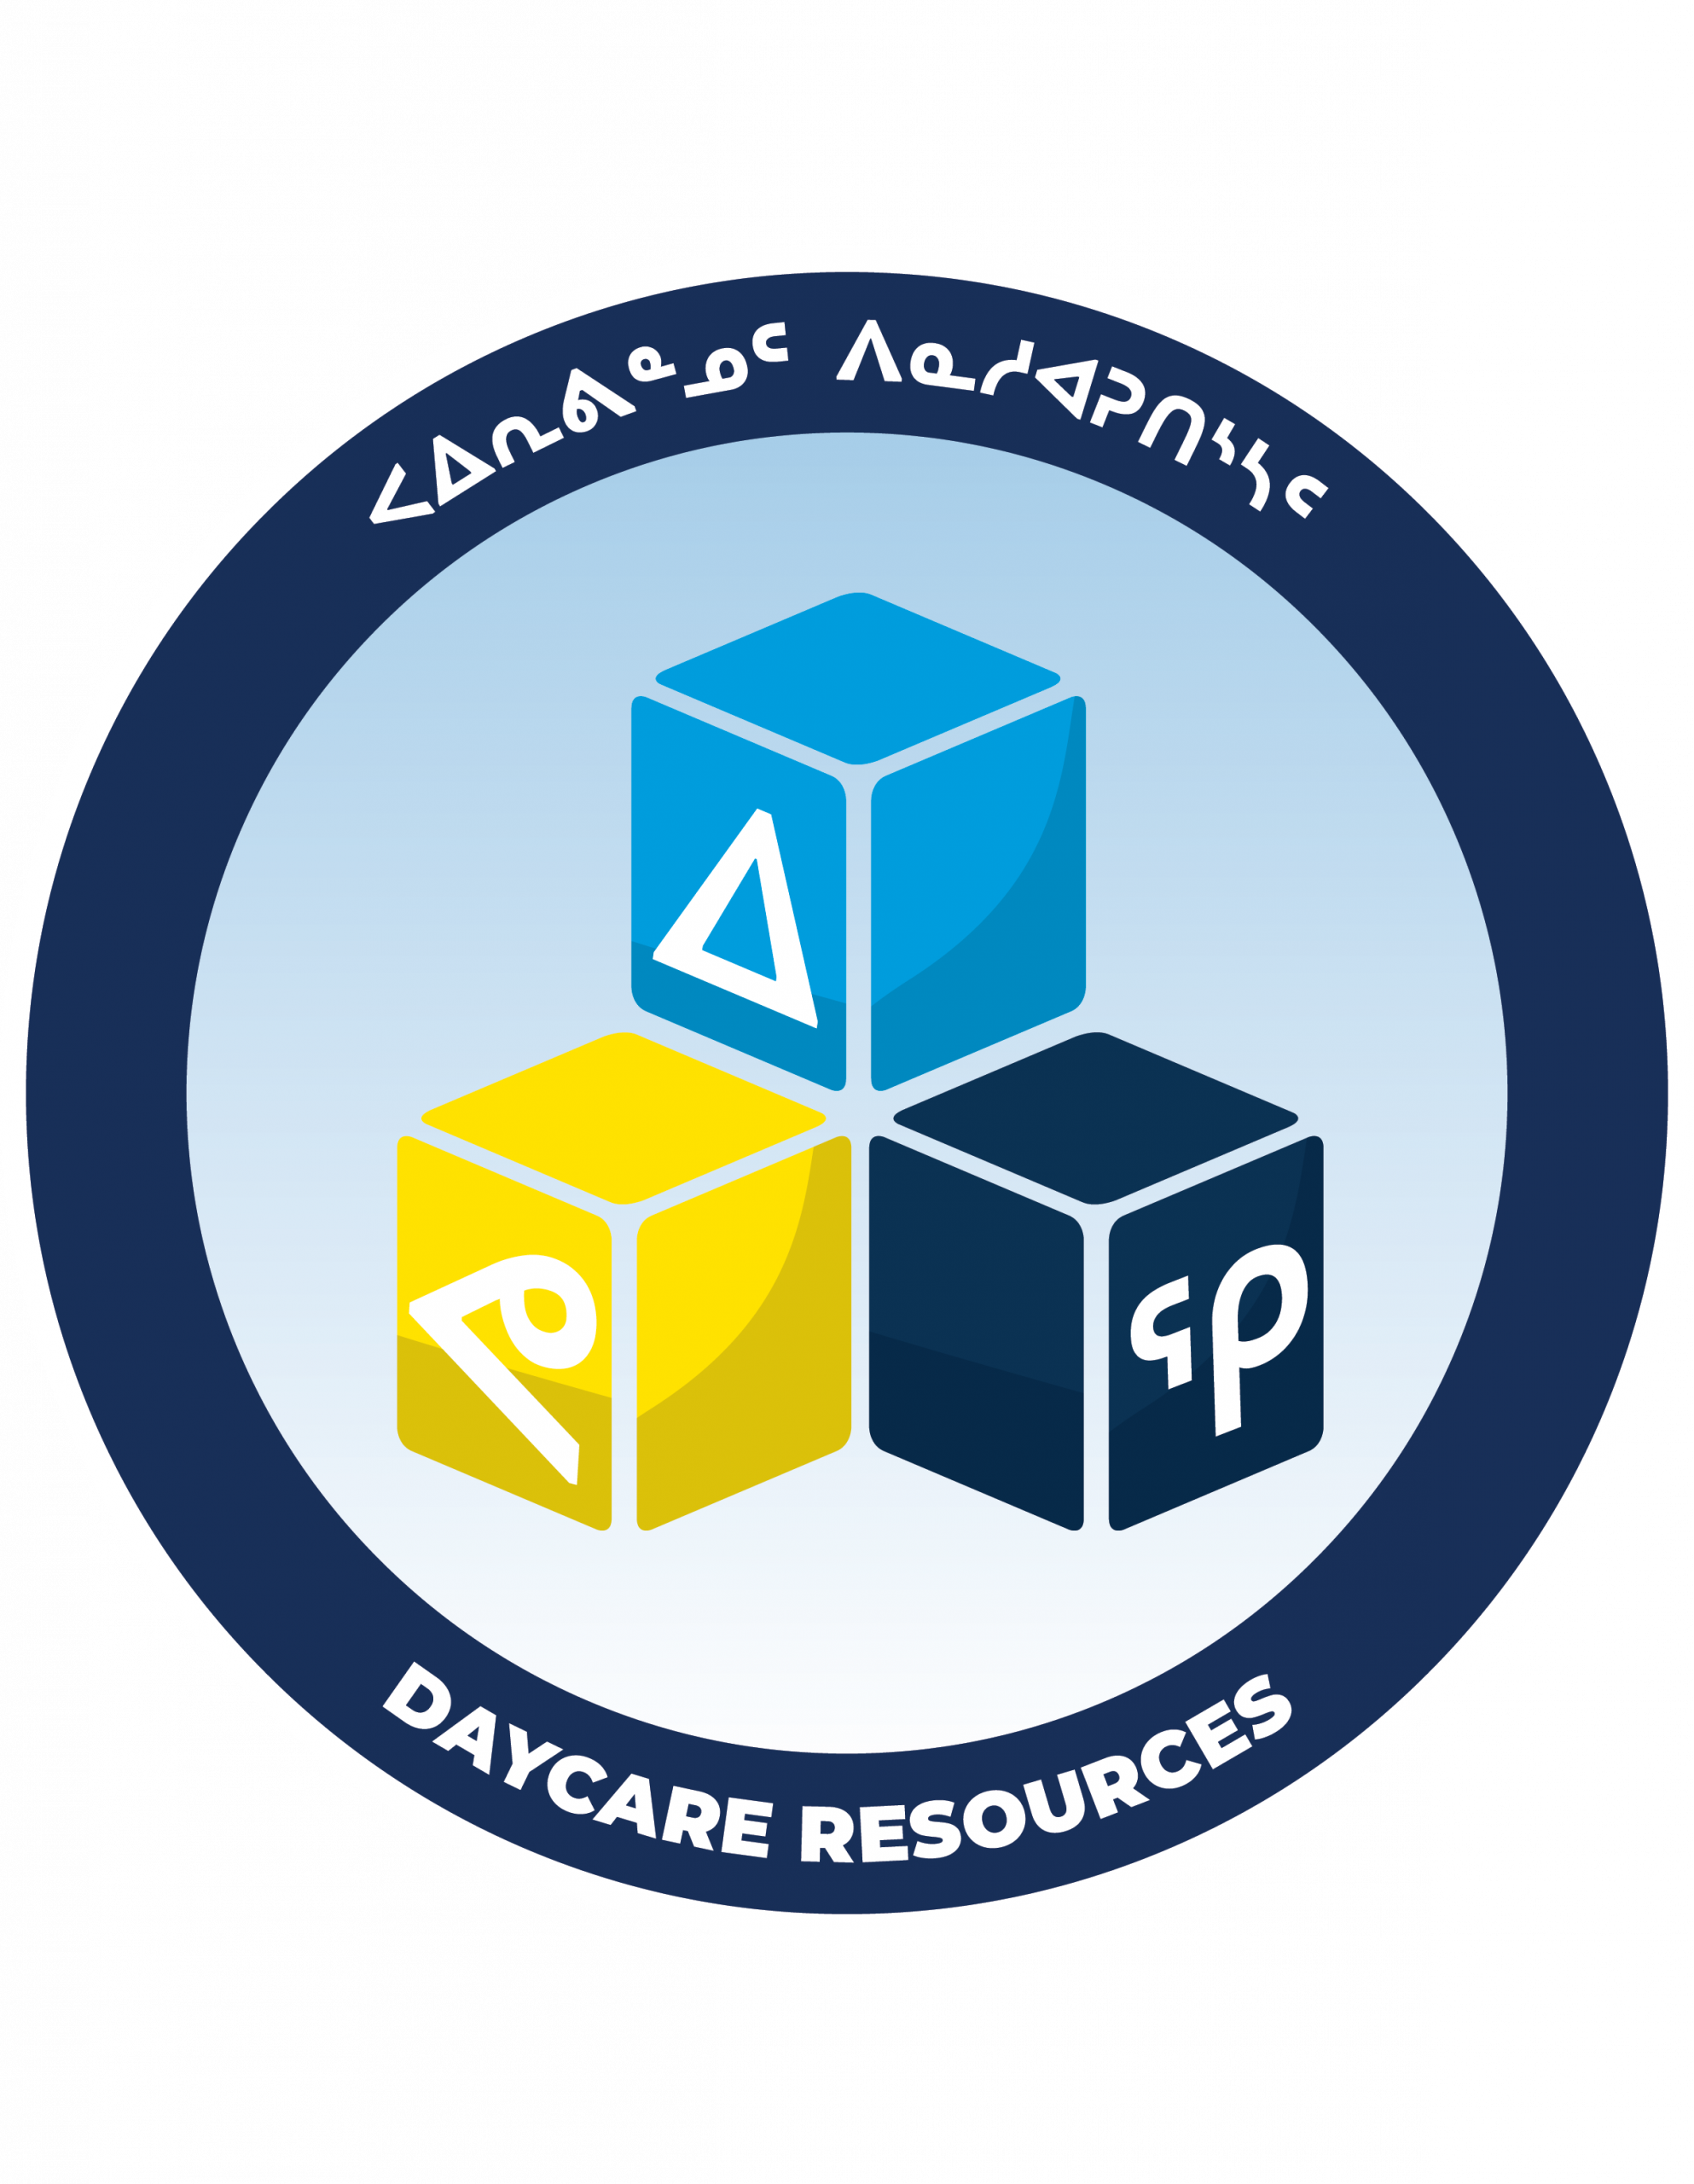 Daycare Resources